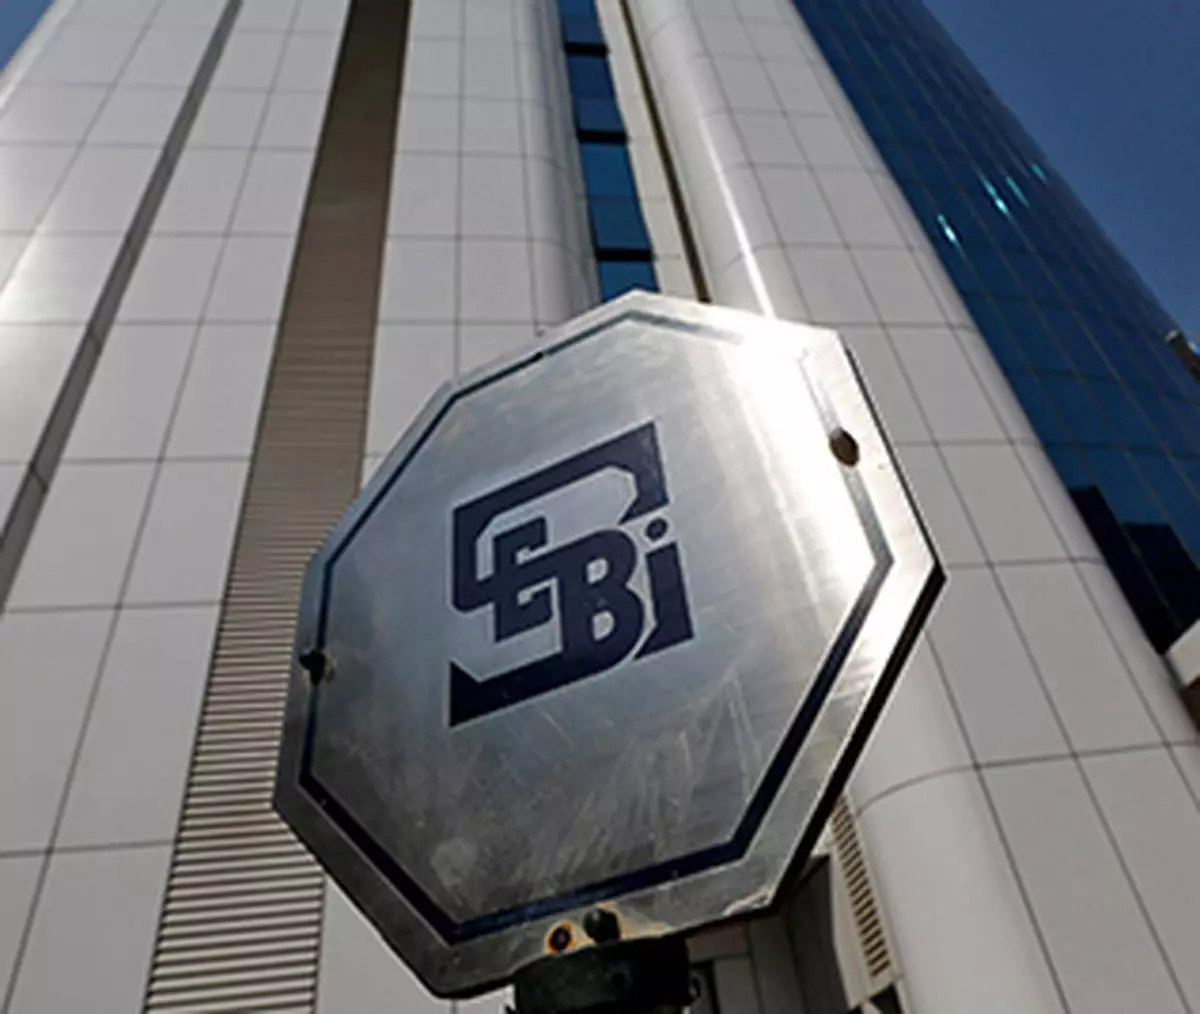 In January, SEBI directed PFS to address the corporate governance issues